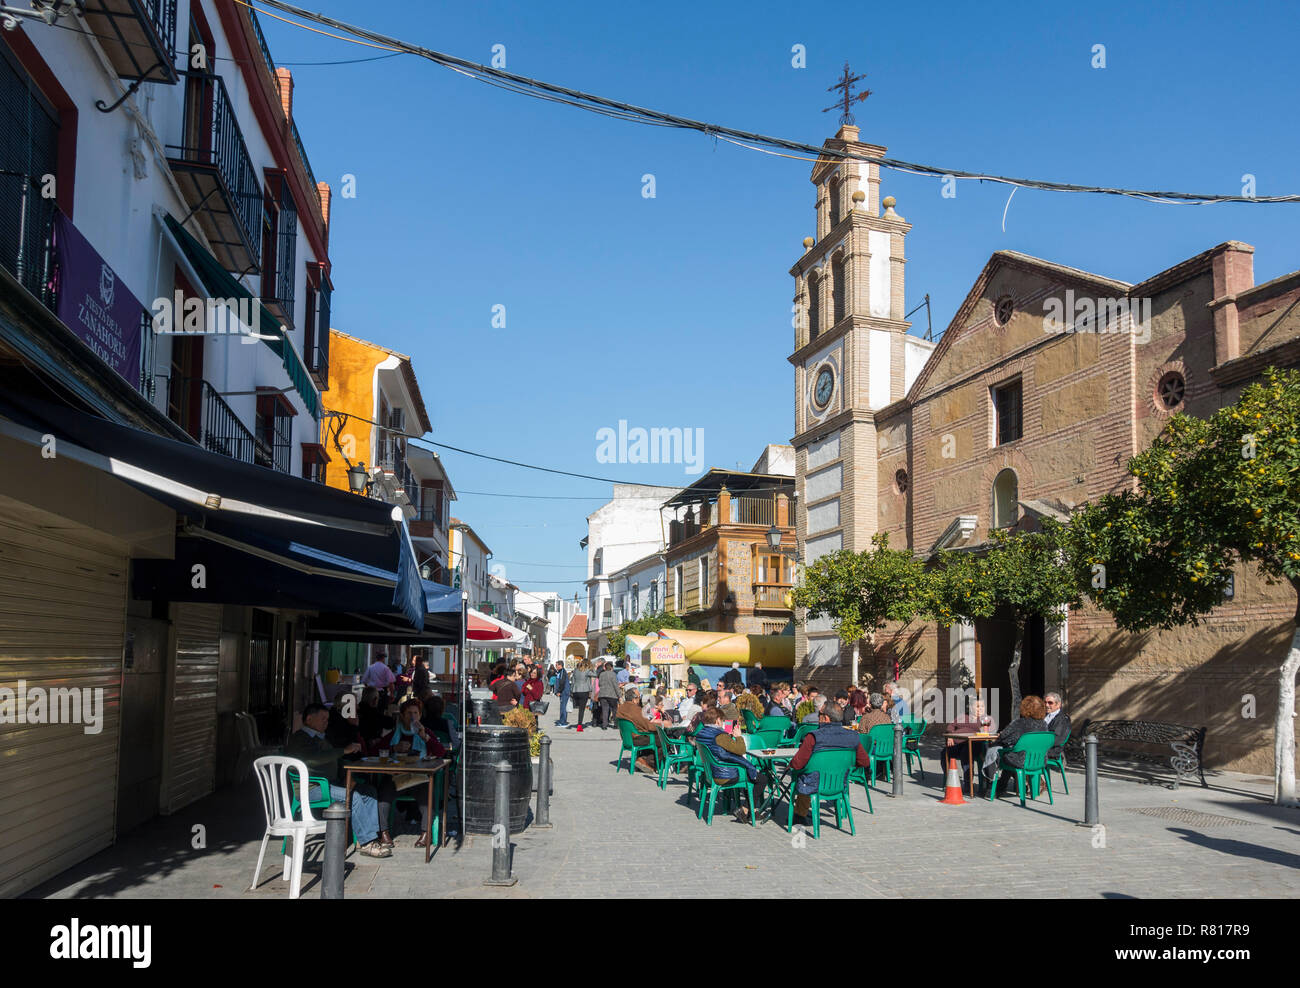 Cuevas Bajas, town square, Small Spanish village, in Malaga province, Andalusia, Spain. Stock Photo